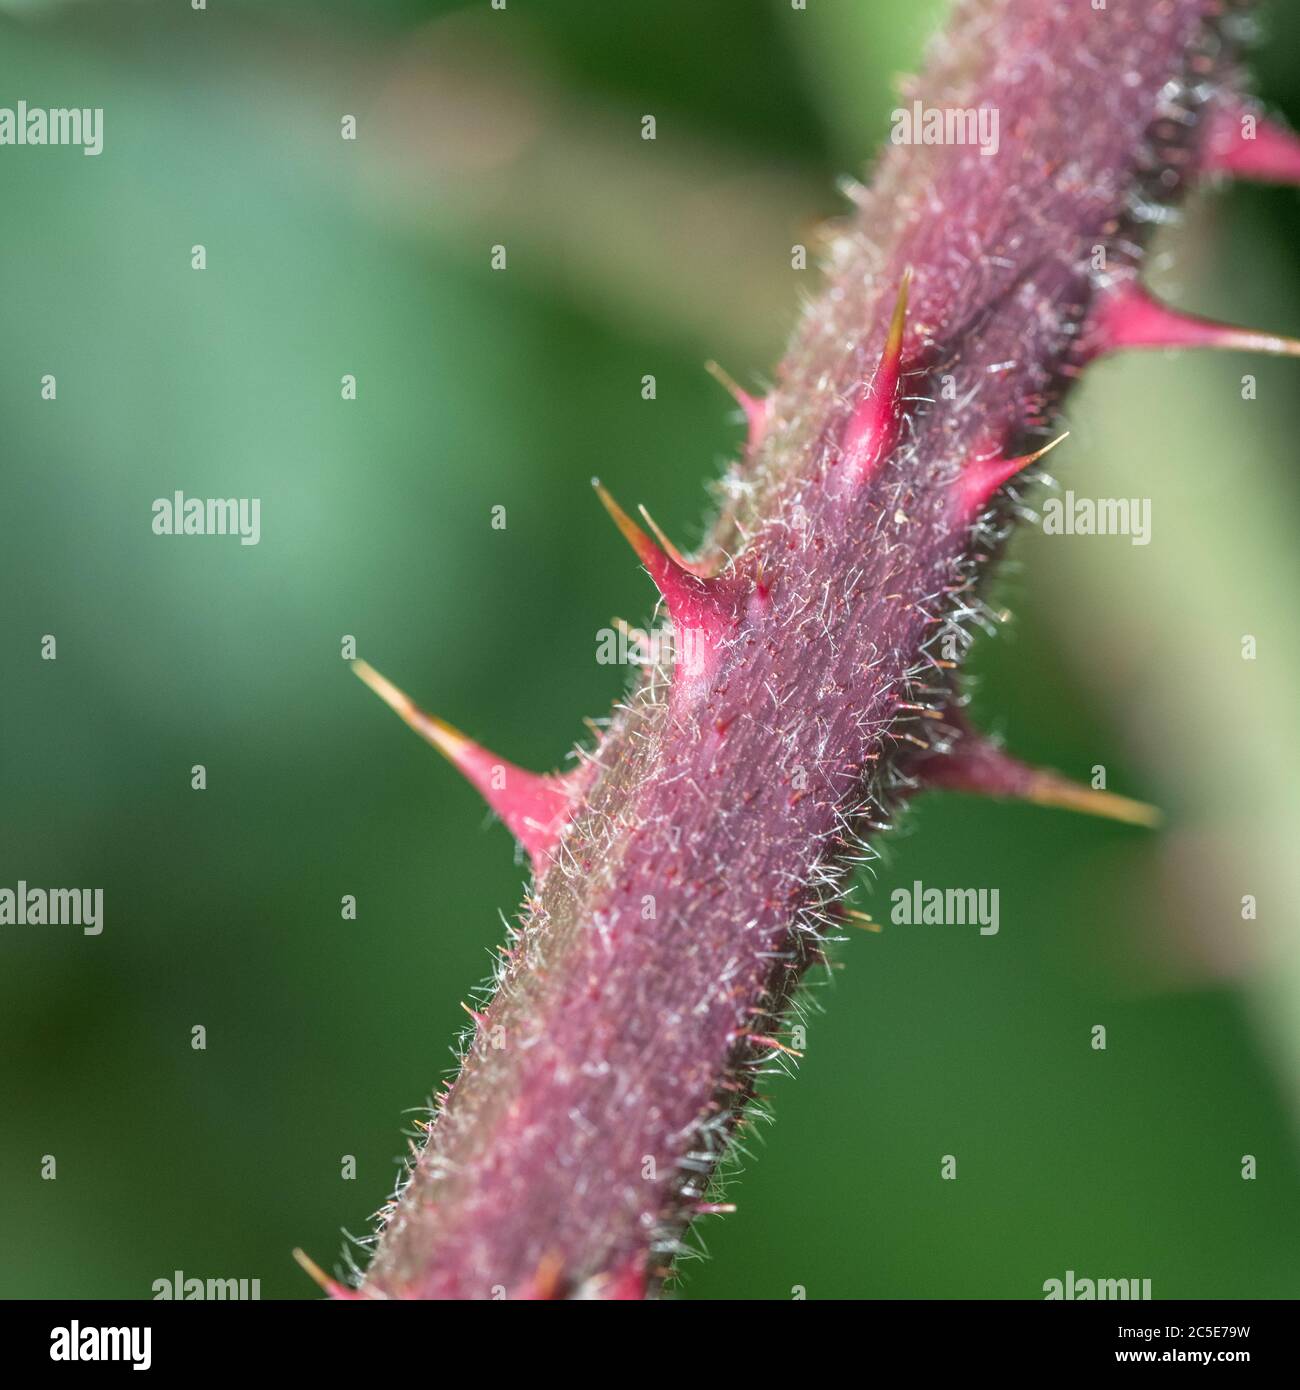 Macro close-up of spiky old-ish prickles on purple-red bramble cane. Medicinal plant once used for herbal remedies. Sharp concept. Shallow DoF. Stock Photo